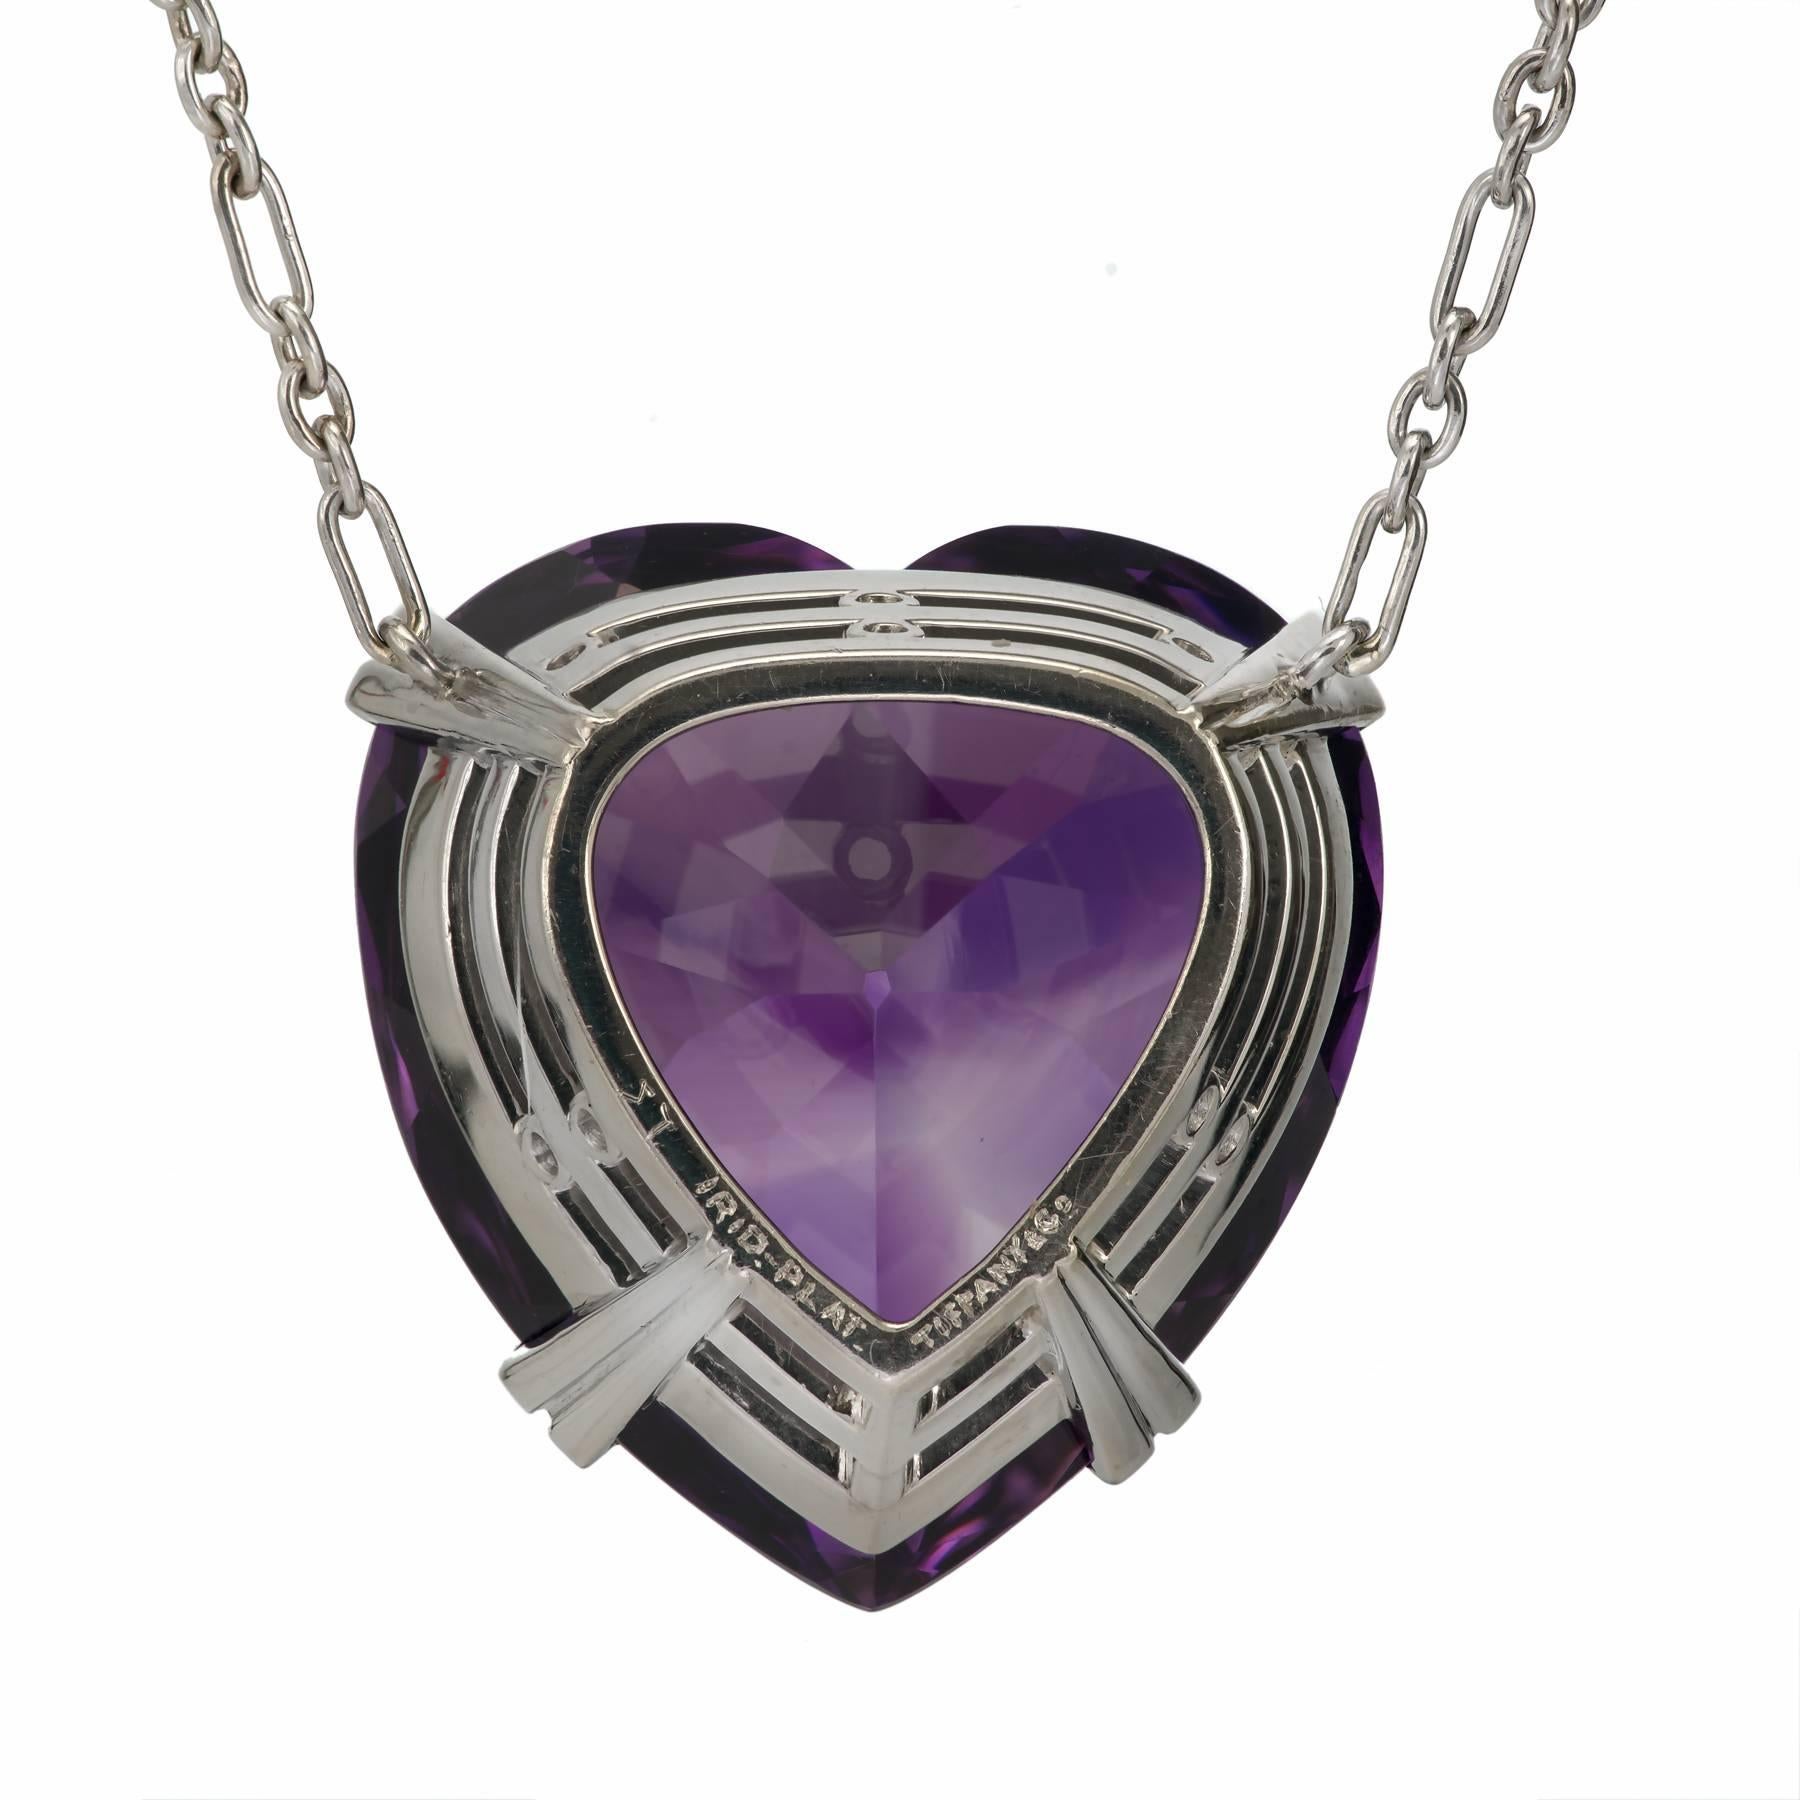 Tiffany & Co handmade Platinum necklace with a deep purple color Amethyst signed Tiffany on the Platinum setting. Platinum chain with spring ring catch. Circa 1960. Tiffany was known in the 1960’s for collecting fine Russian Amethyst and making